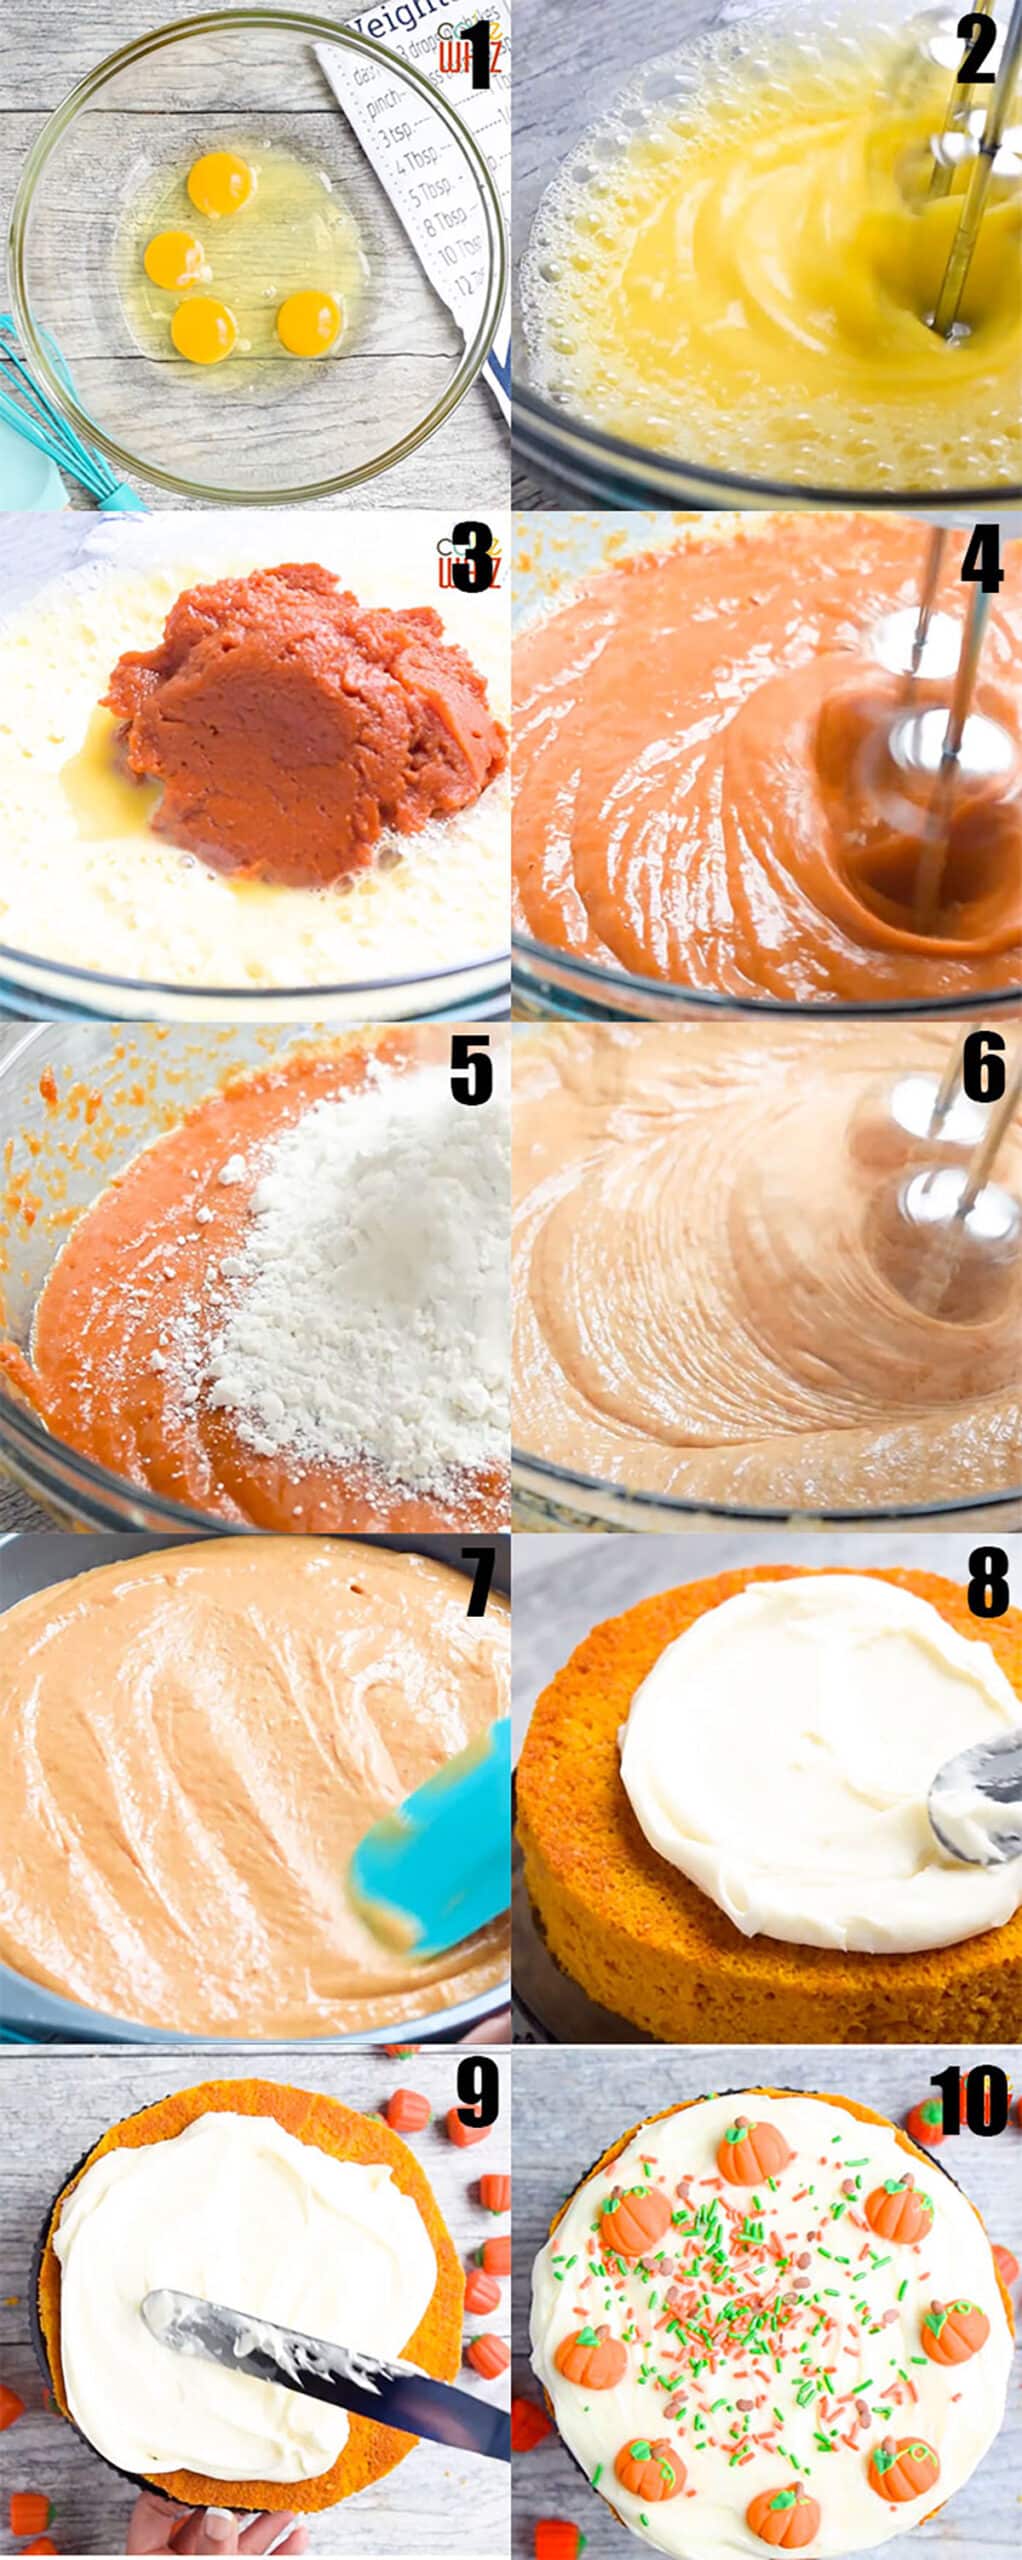 Collage Image With Step By Step Process Shots on How to Make Pumpkin Cake With Cake Mix Box